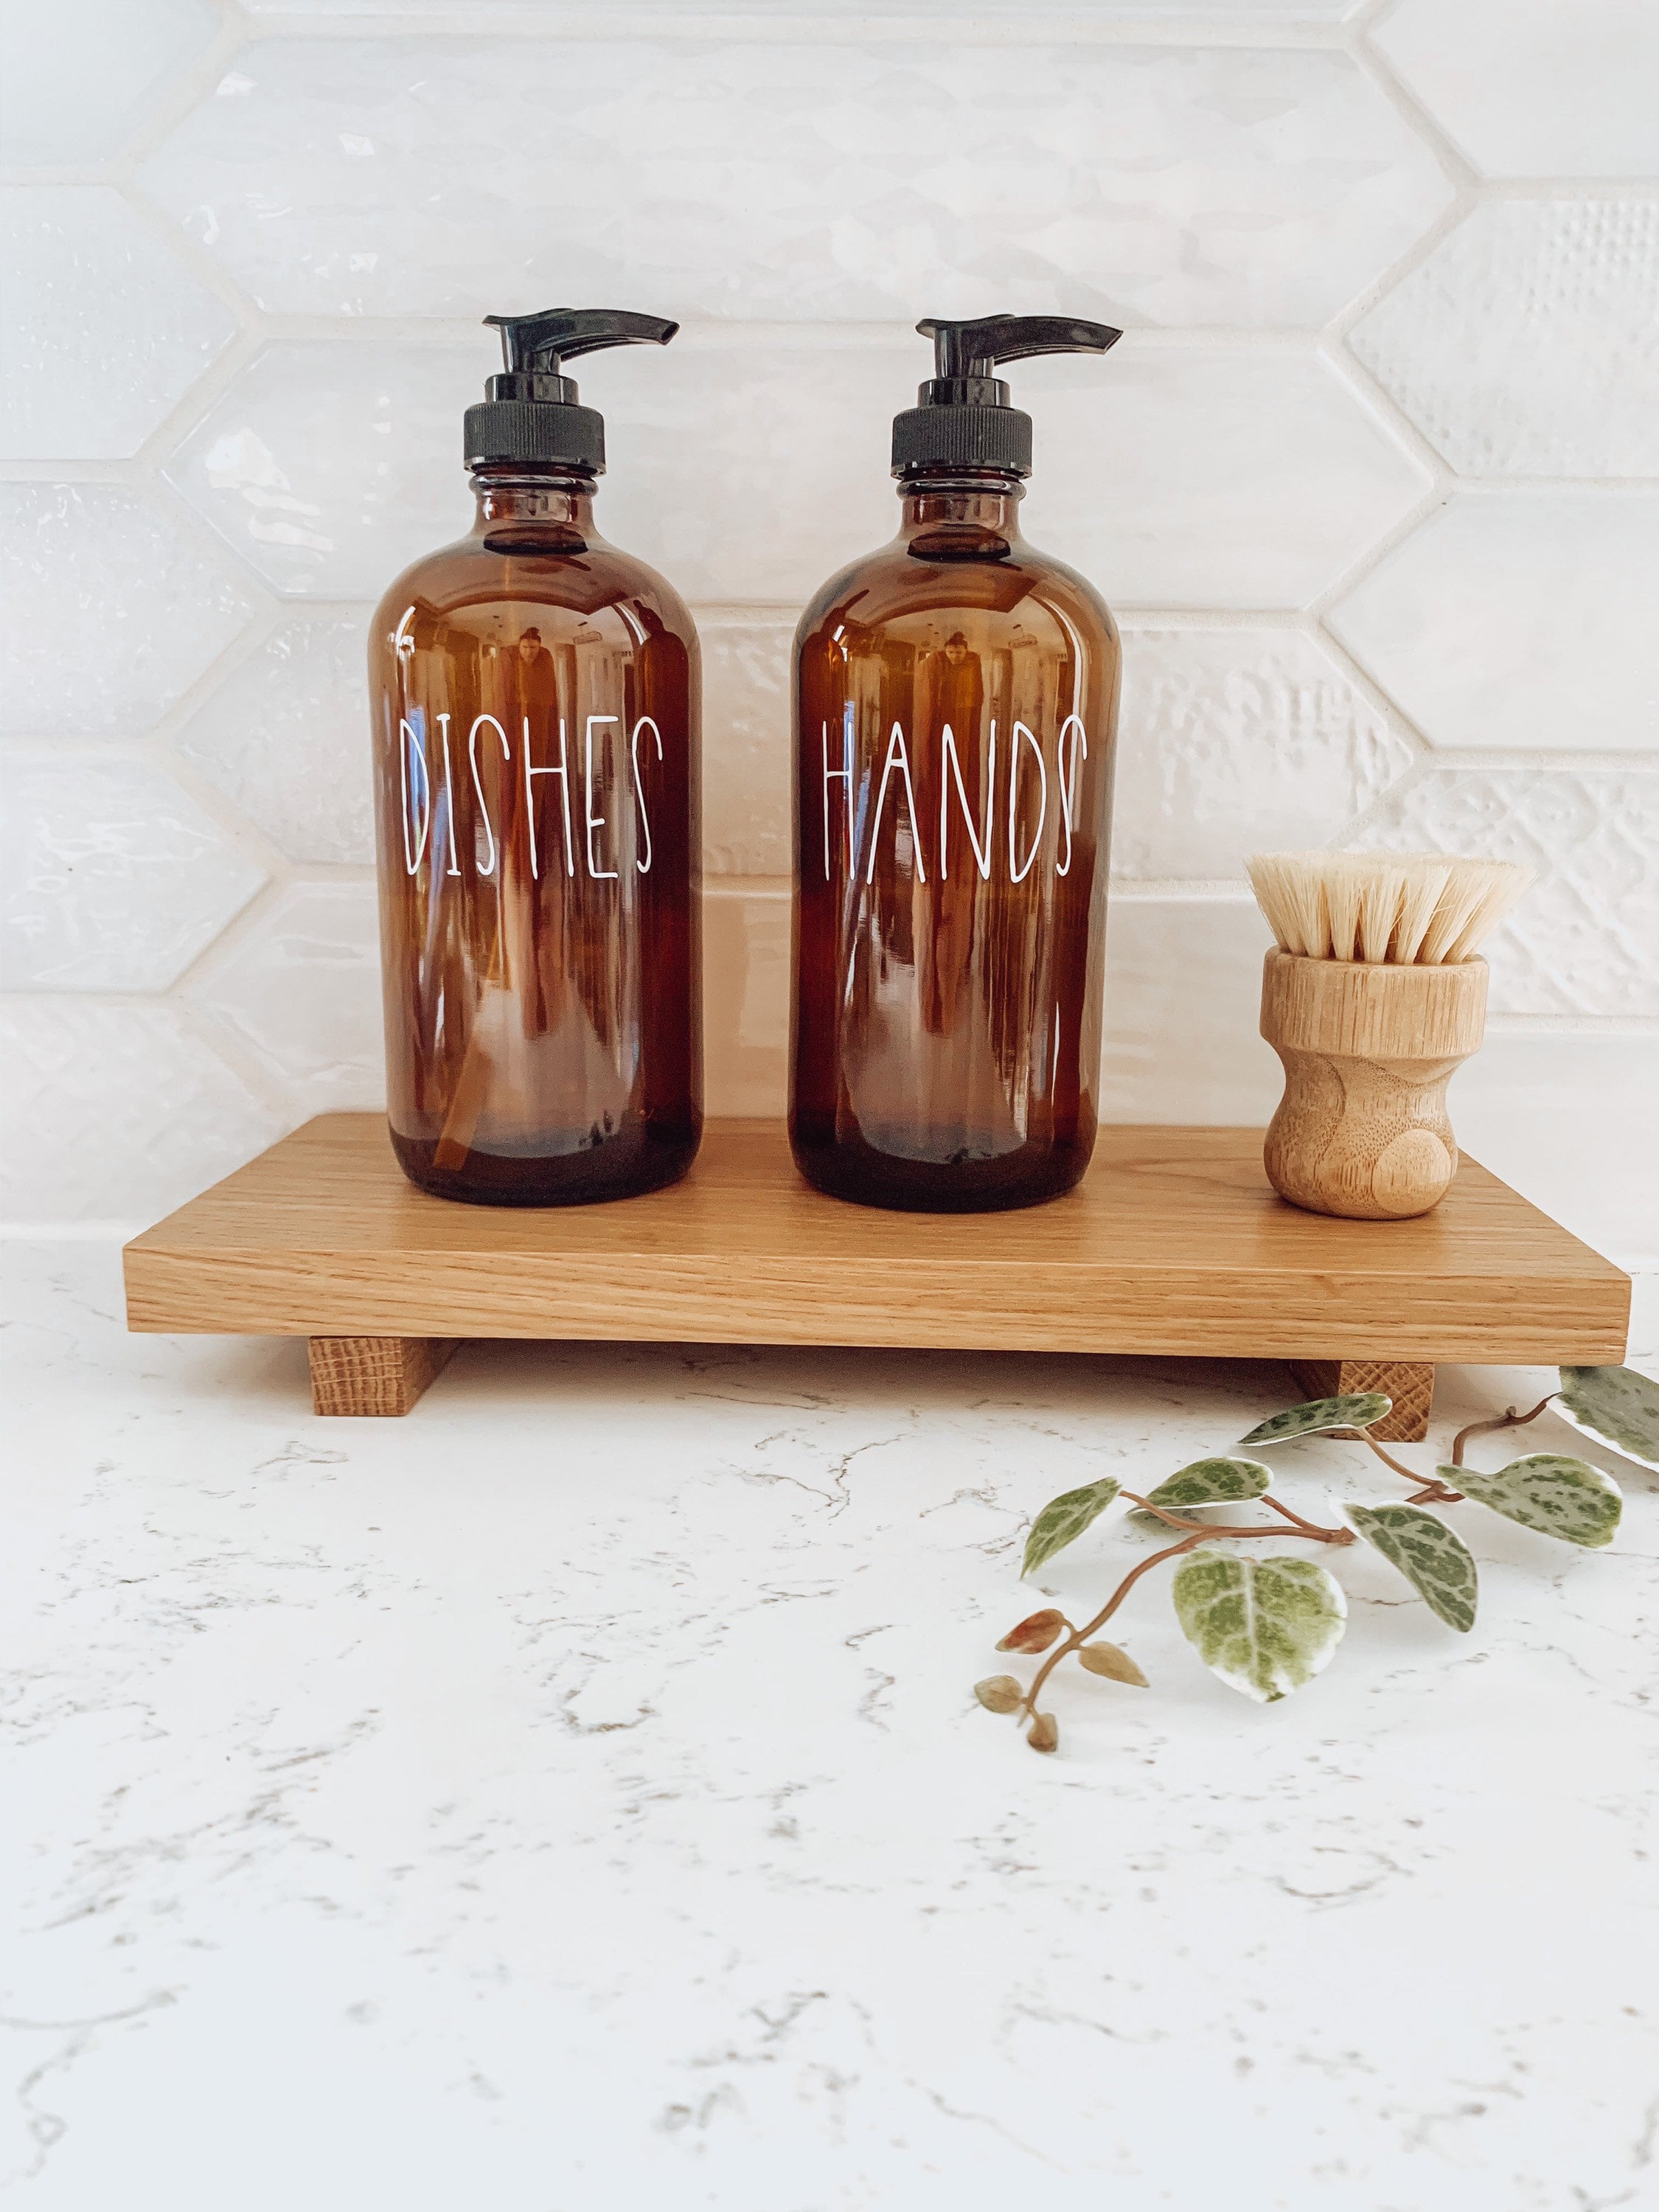  4 Pieces Kitchen Soap Dispenser Set 16 oz Dish Soap Dispenser  with Bamboo Pump Soap Tray and Dish Brush Bathroom Soap Dispenser Set with  Waterproof Labels for Hand Soap Dish Lotion (